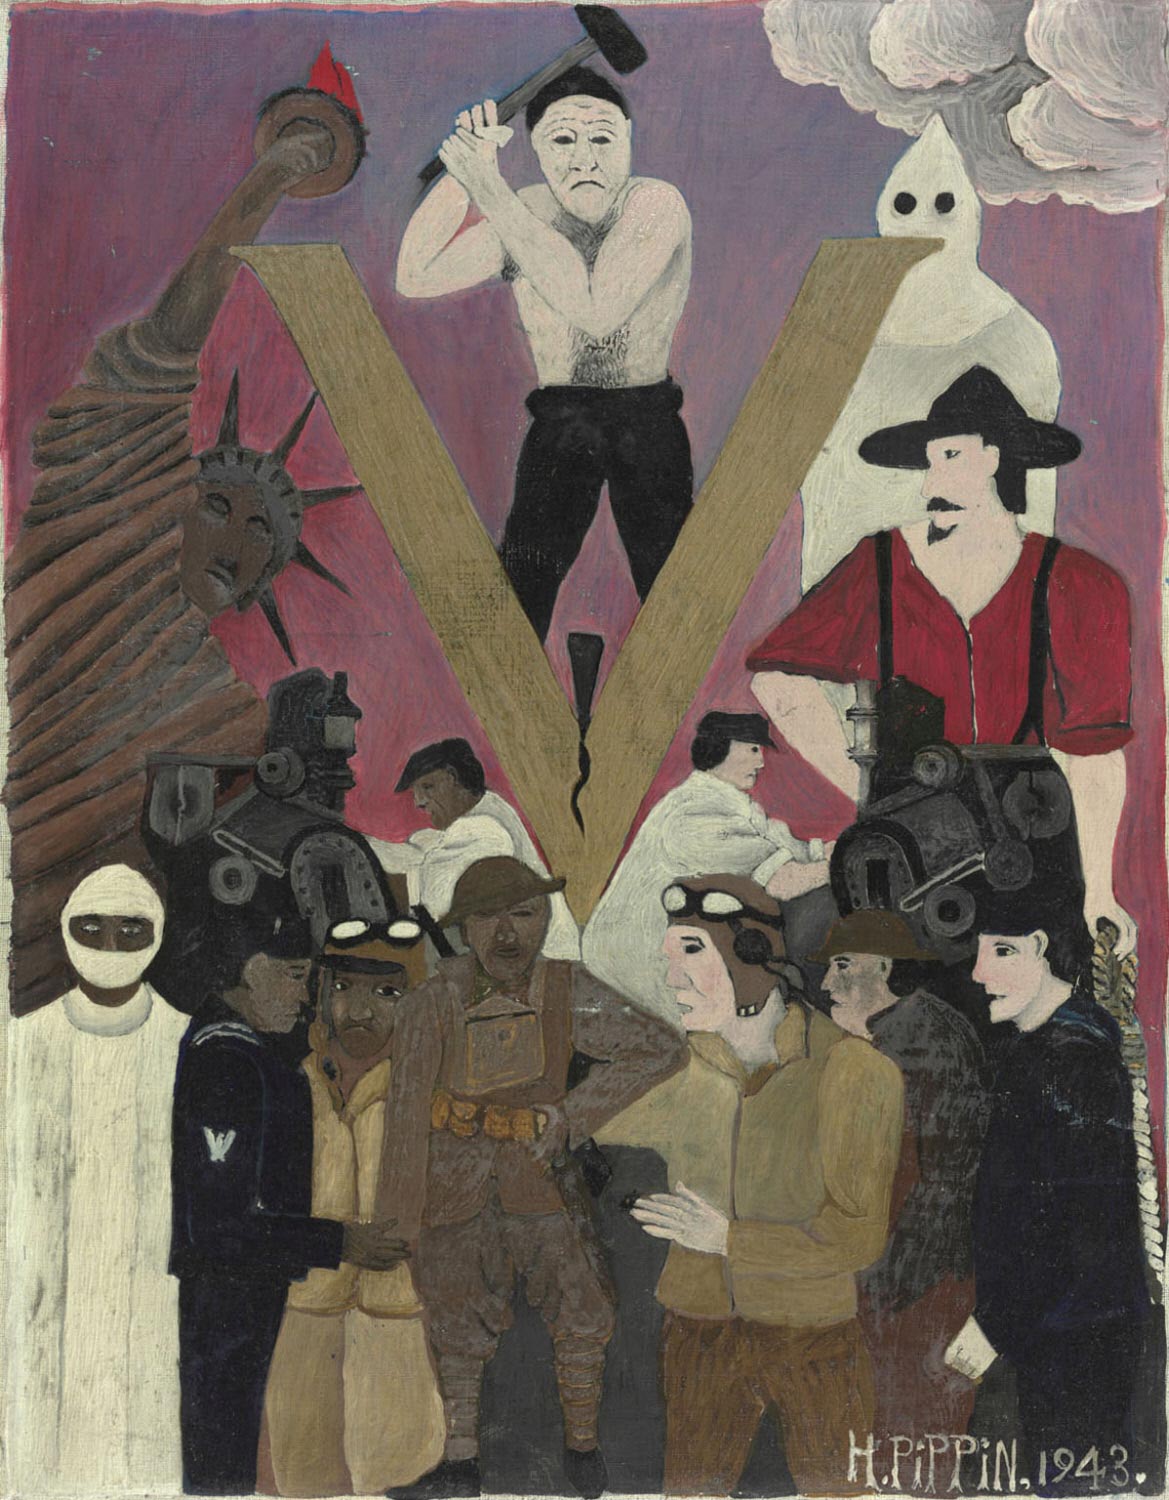 Horace Pippin (1888-1946), Mr. Prejudice, 1943, Oil on canvas, 18 1/8 x 14 1/8 inches